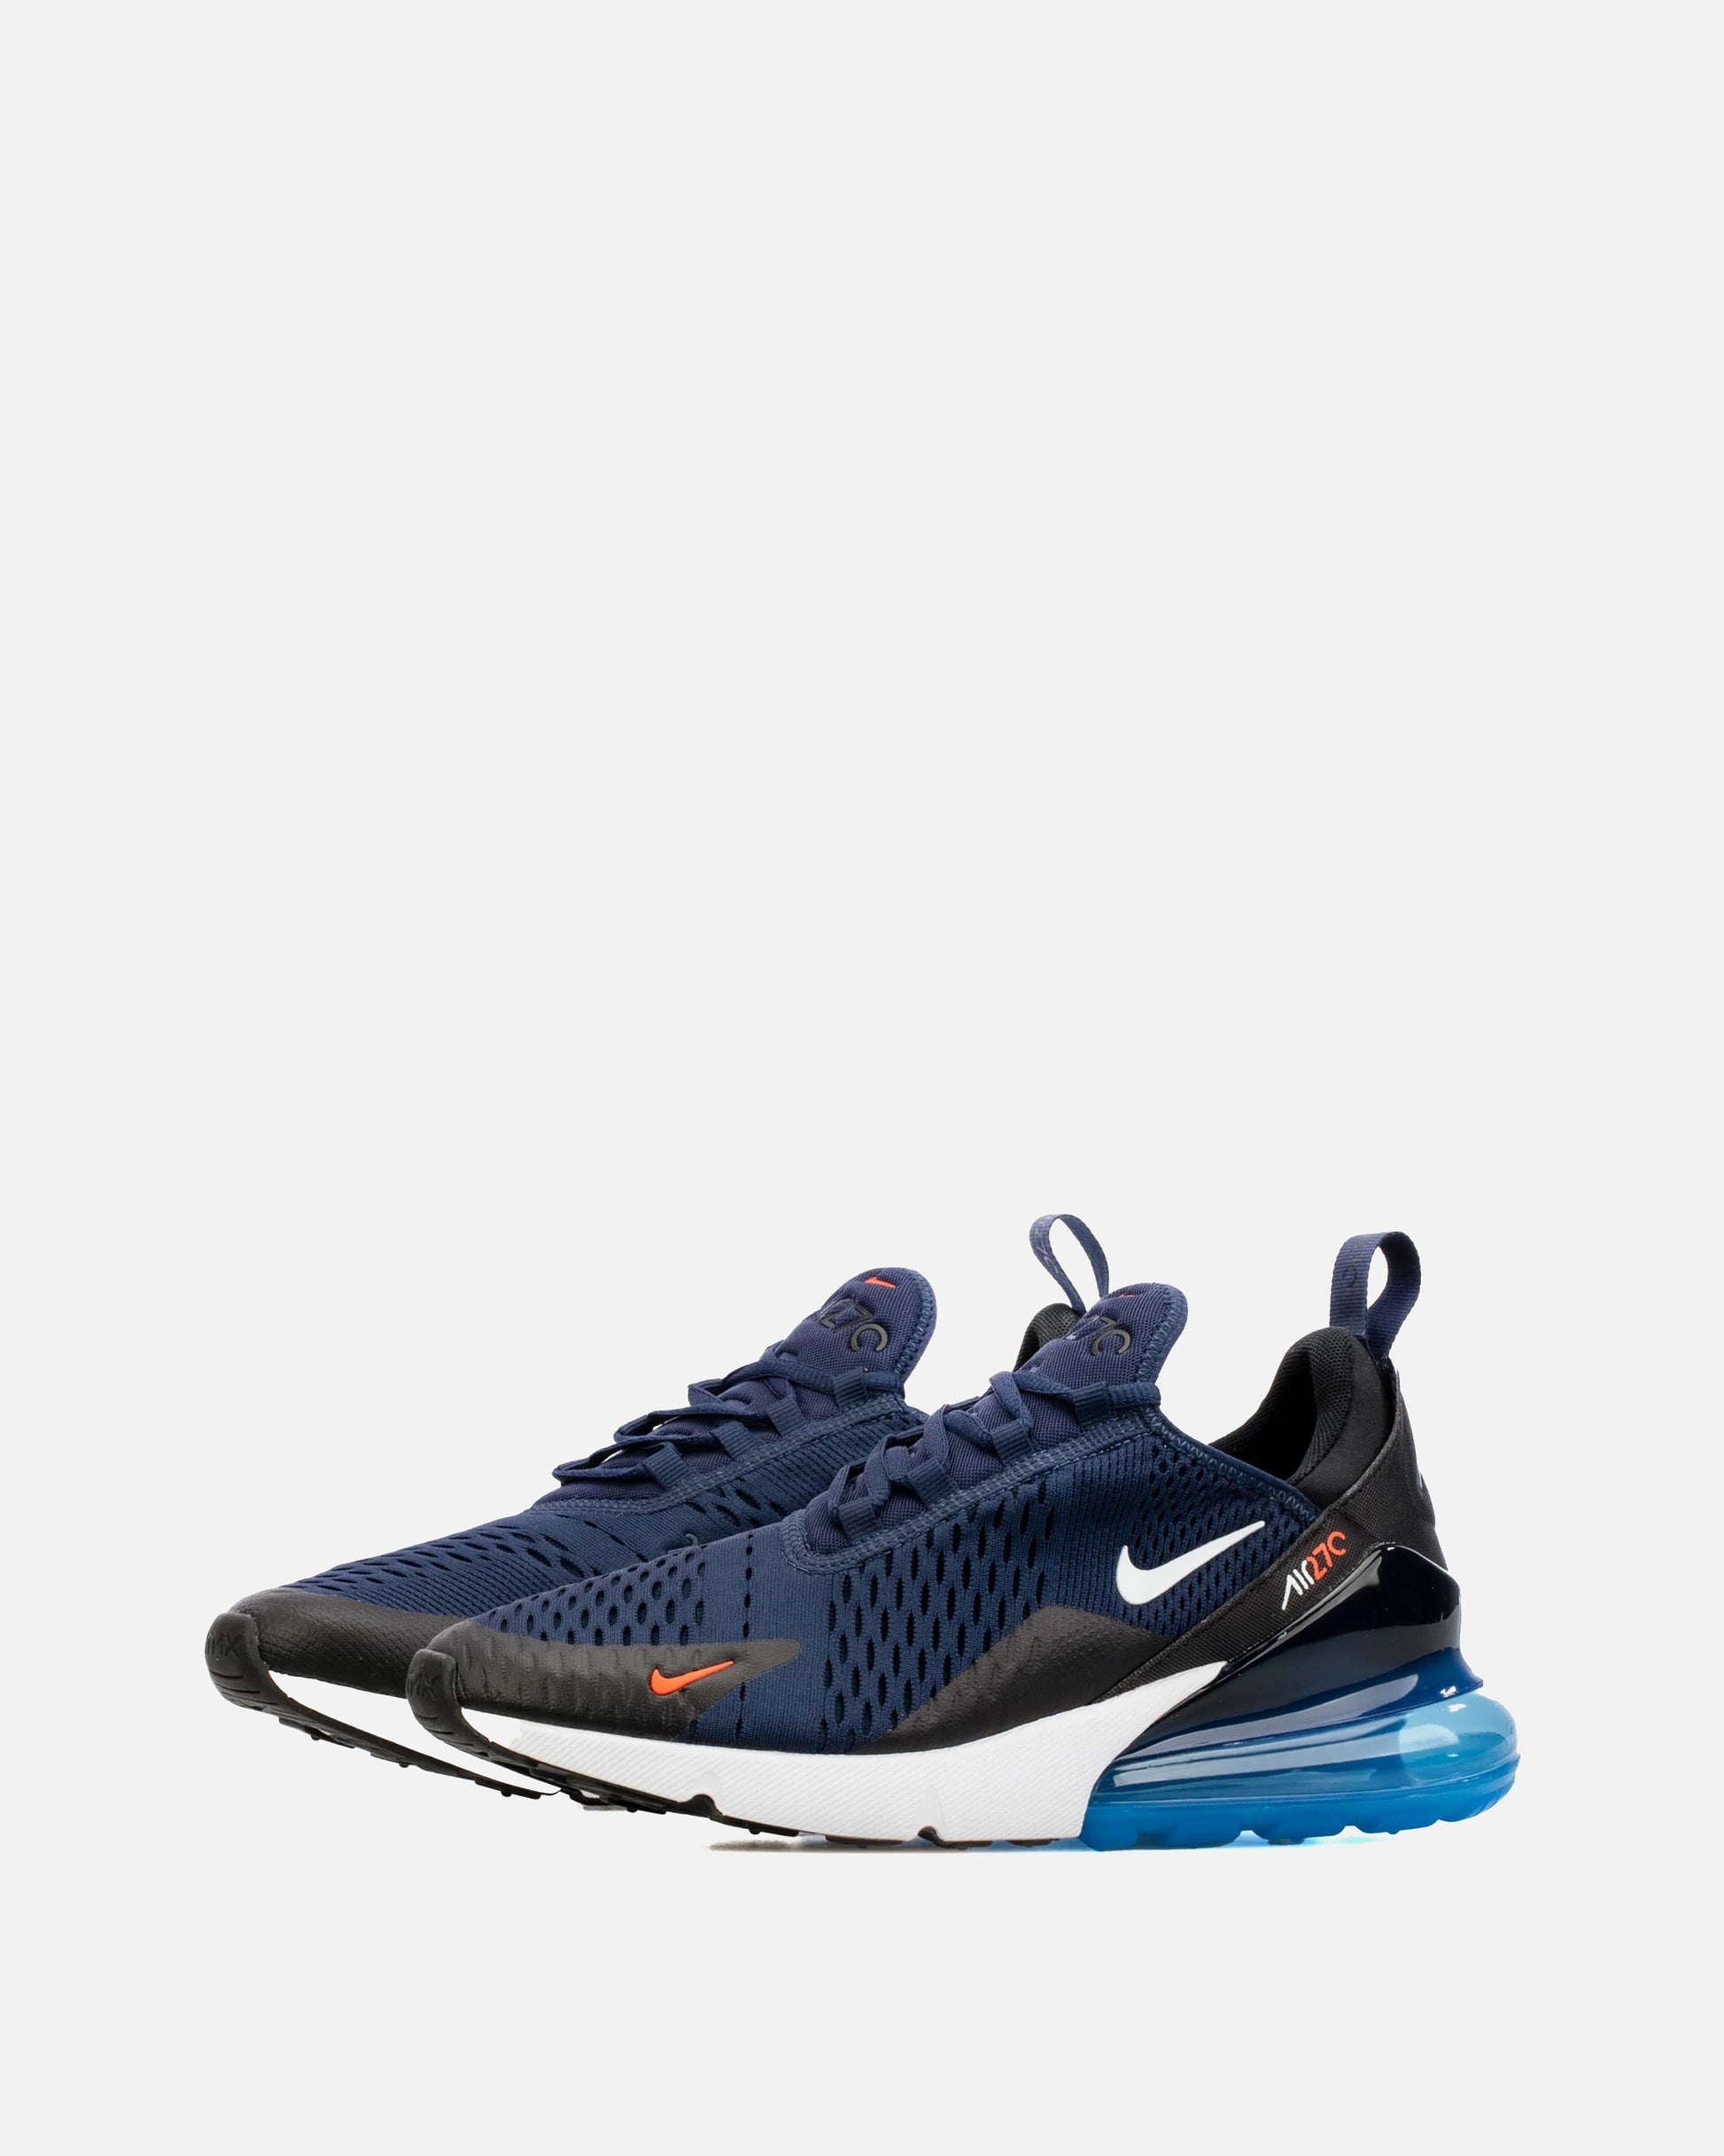 Nike Men's Shoes Air Max 270 'Midnight Navy'